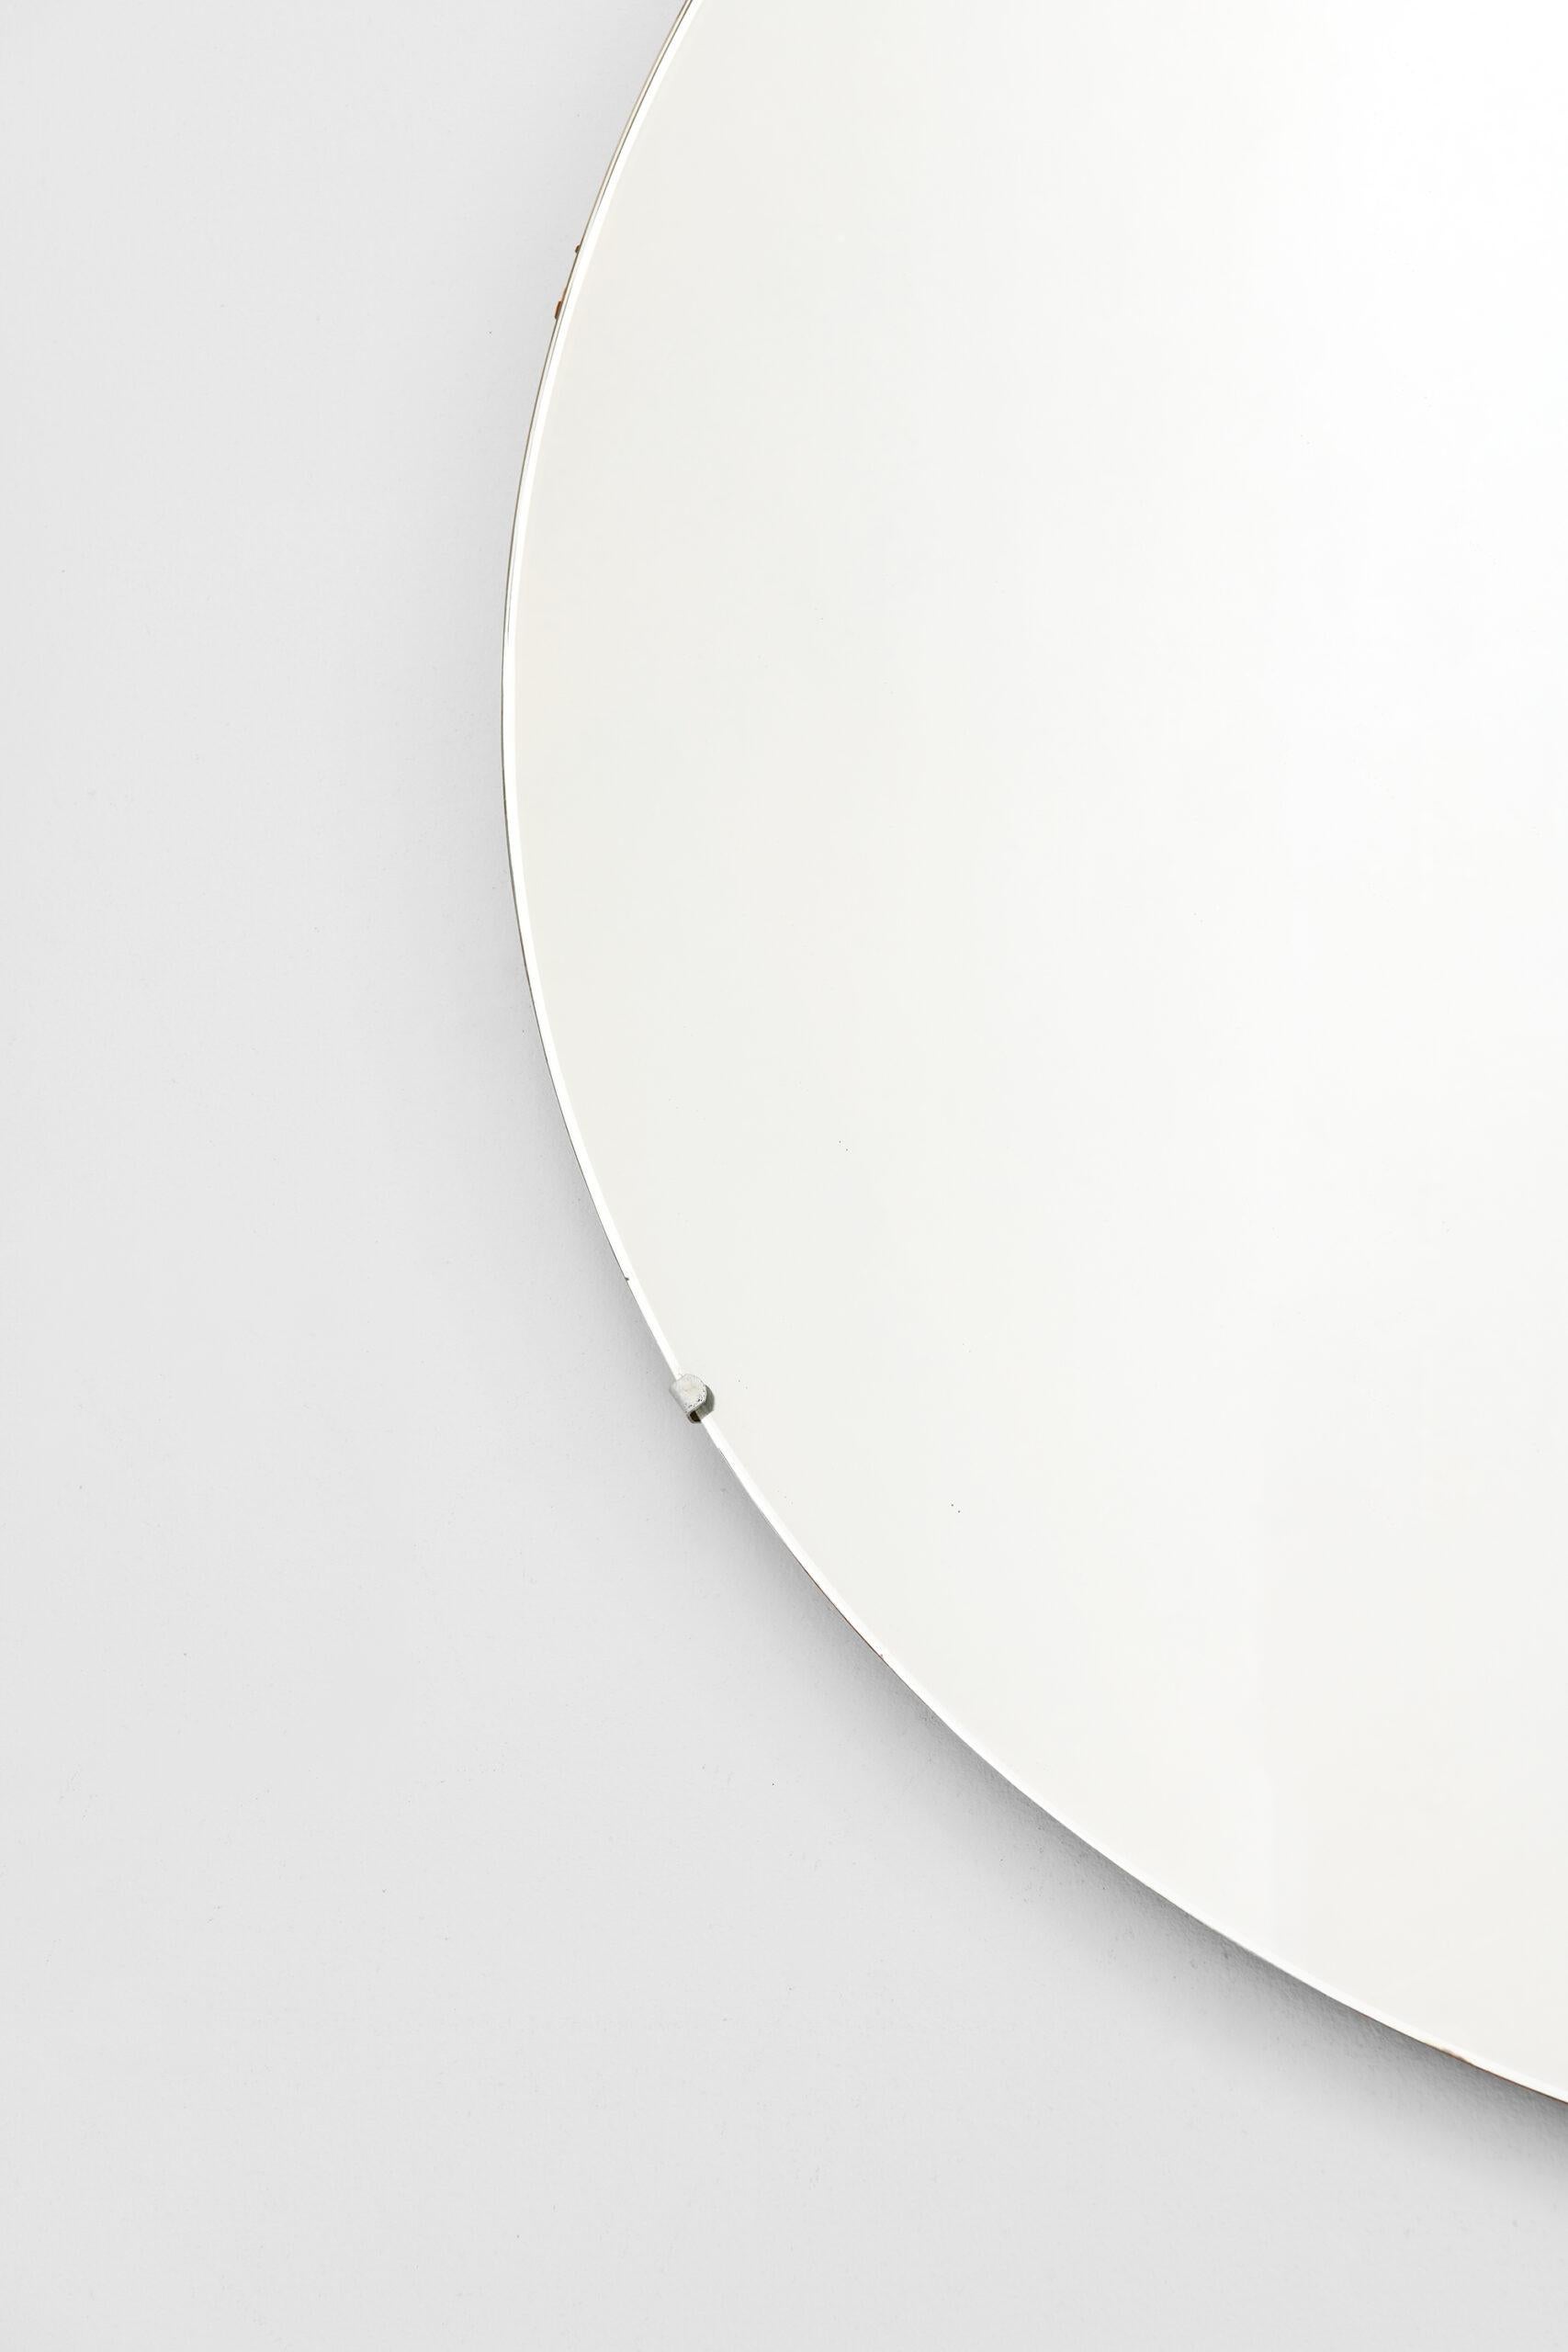 Large round mirror by unknown designer. Produced in Sweden.